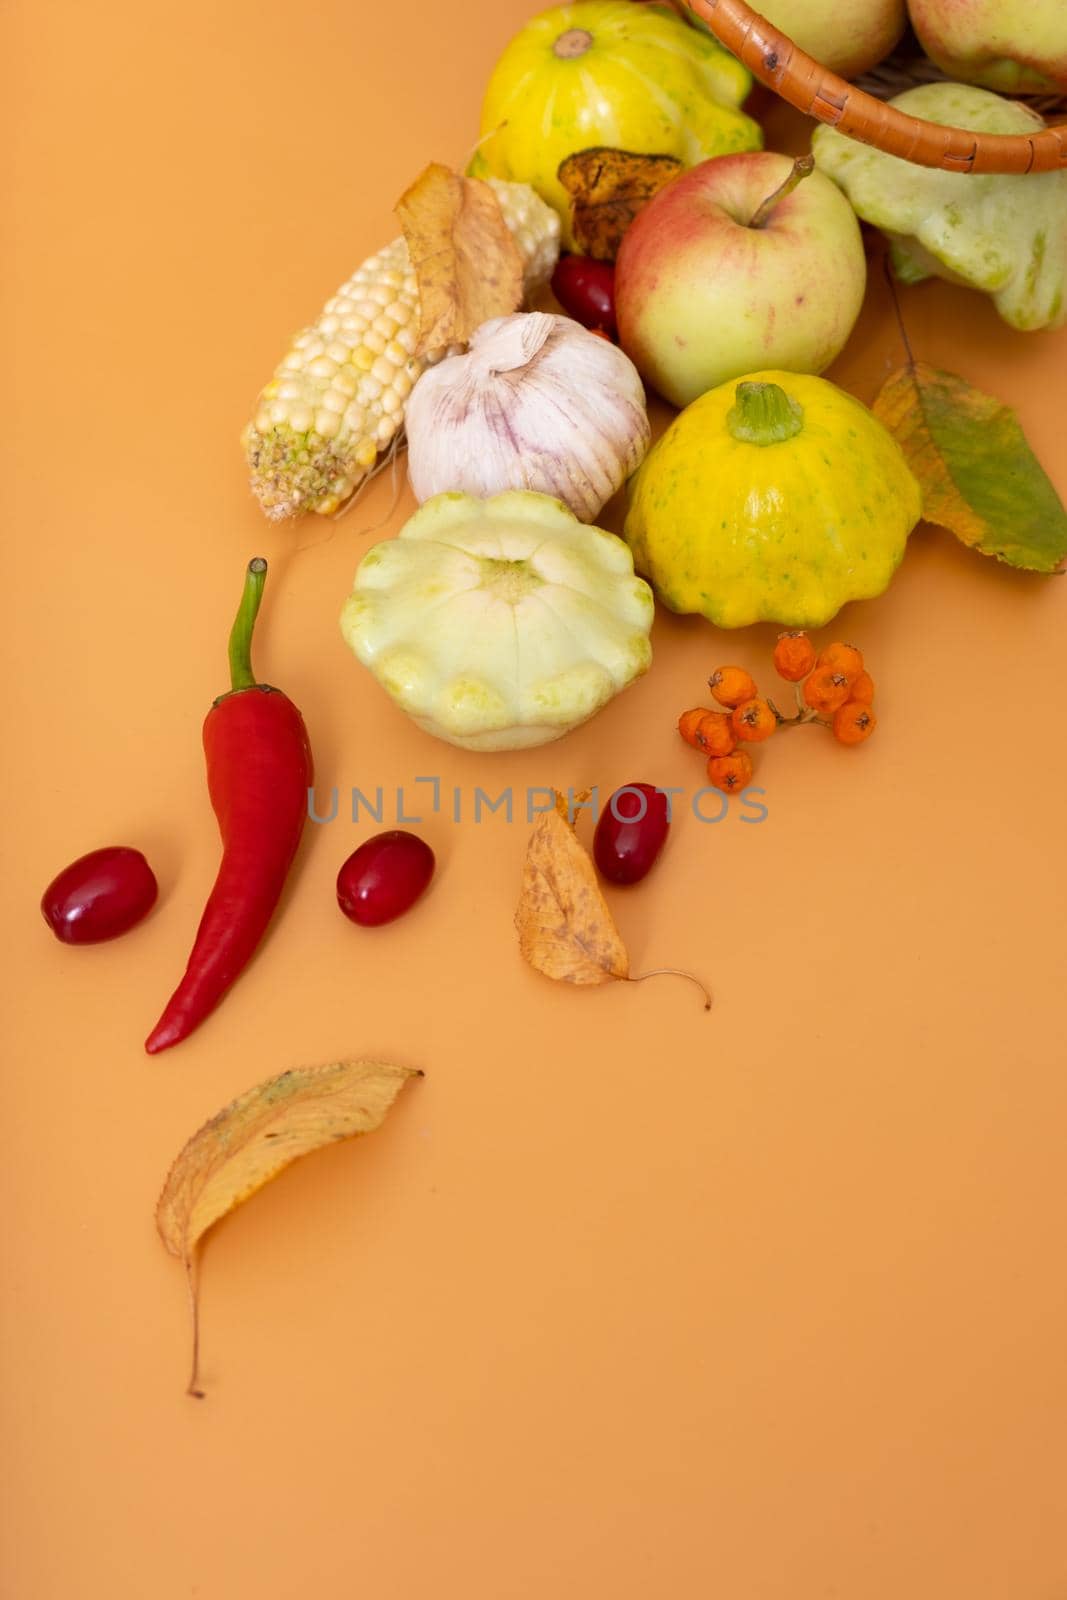 Autumn harvest basket with corn, apples, zucchini and peppers on a orange background. Harvest concept.